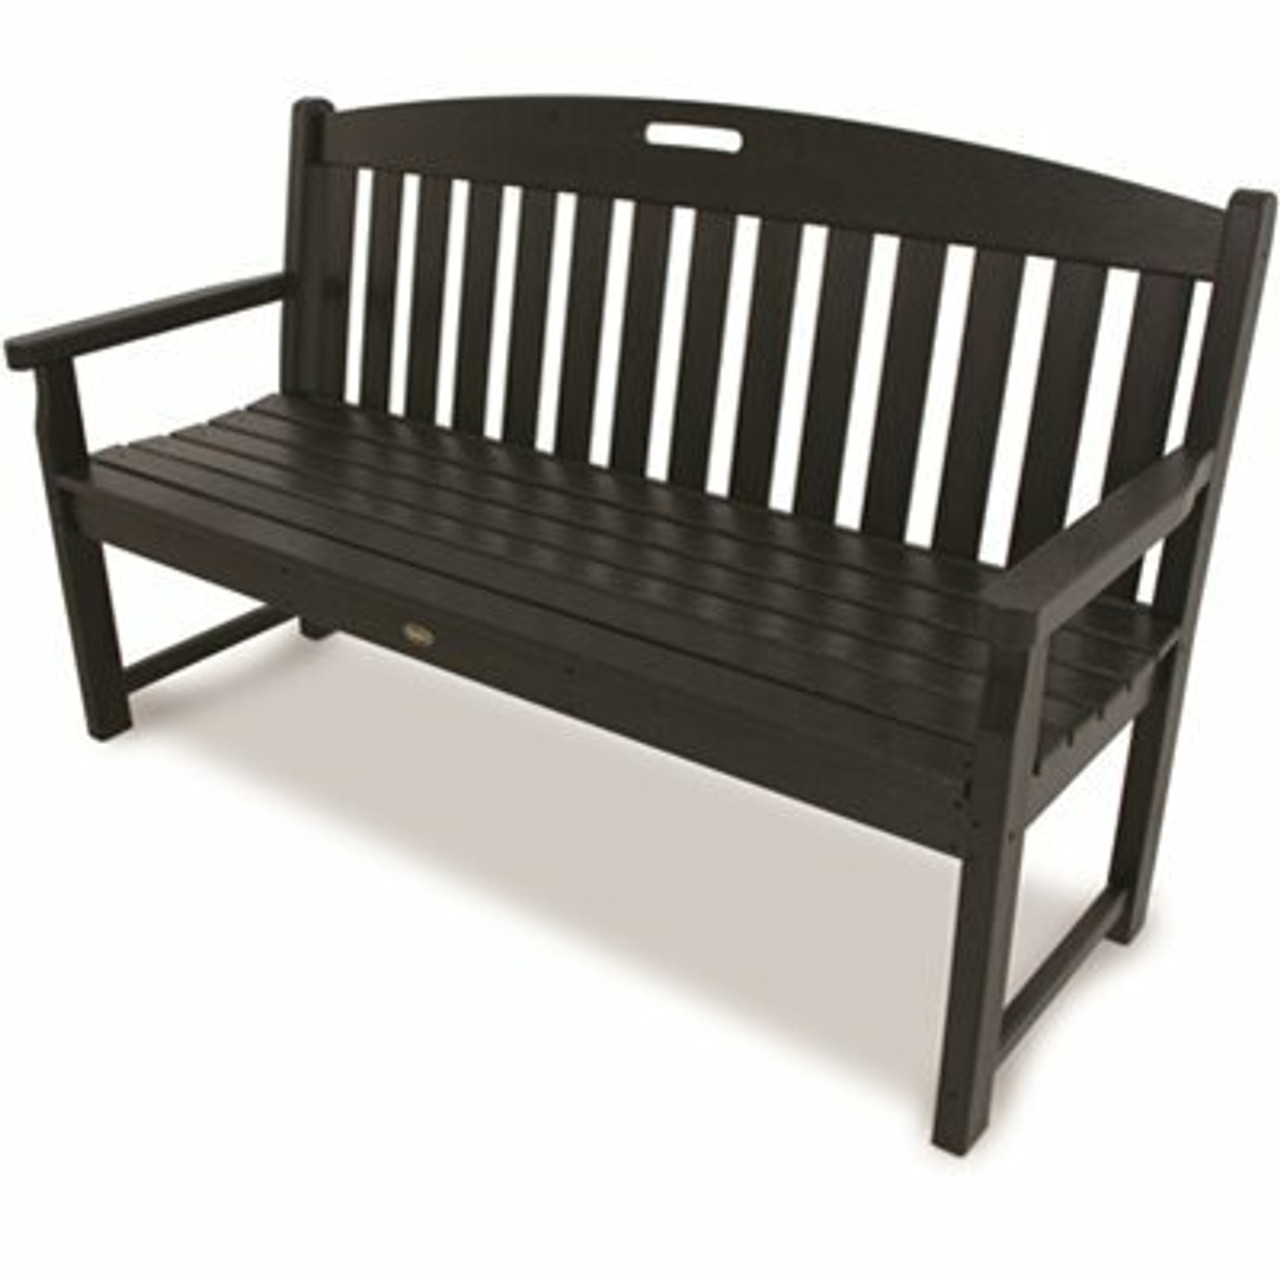 Trex Outdoor Furniture Yacht Club 60 In. Plastic Outdoor Bench In Charcoal Black